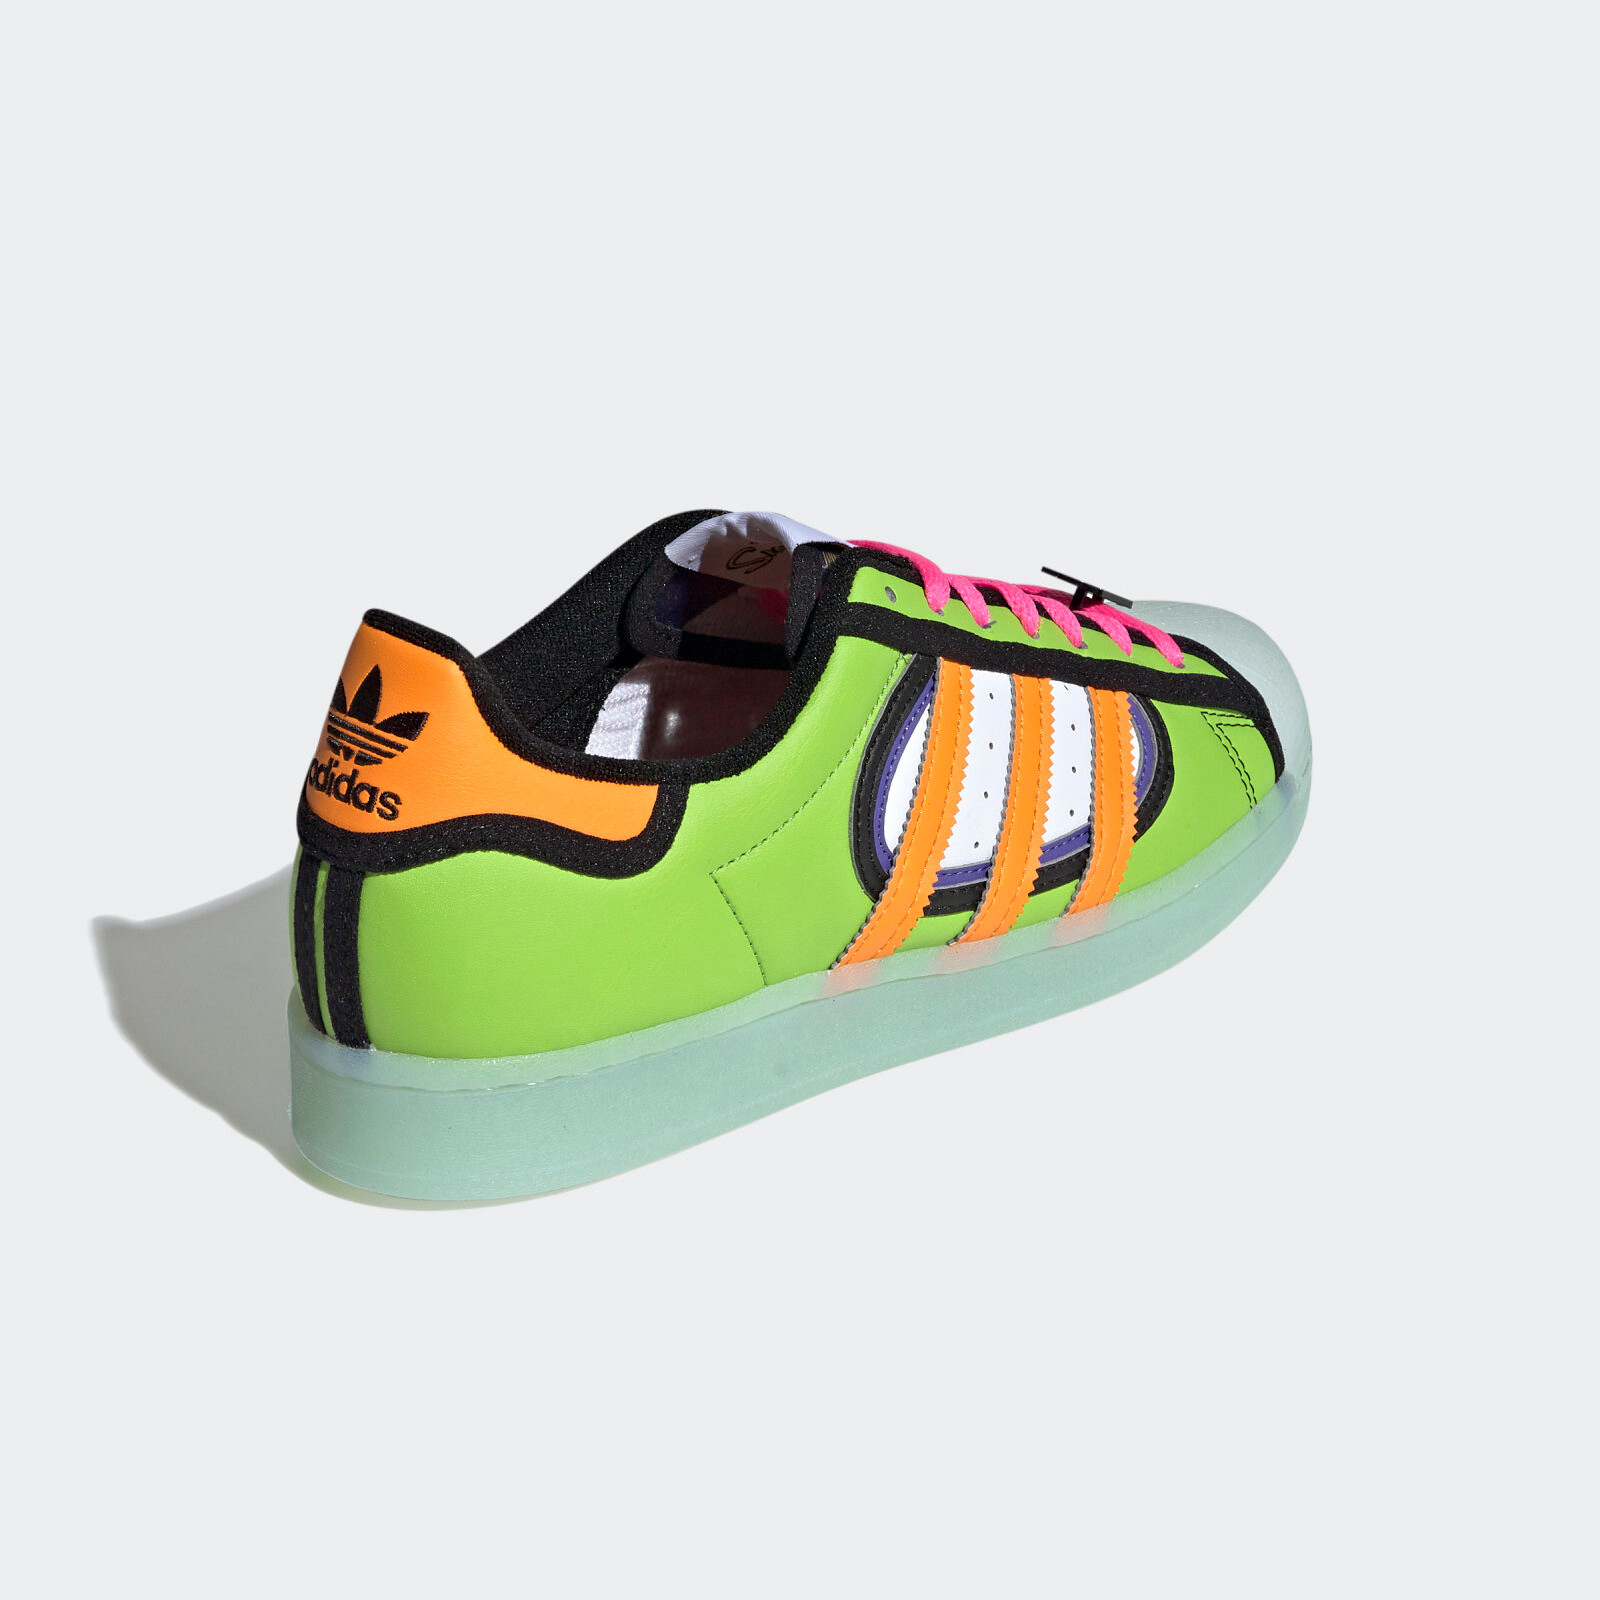 The Simpsons x Adidas
Superstar « Squishee »